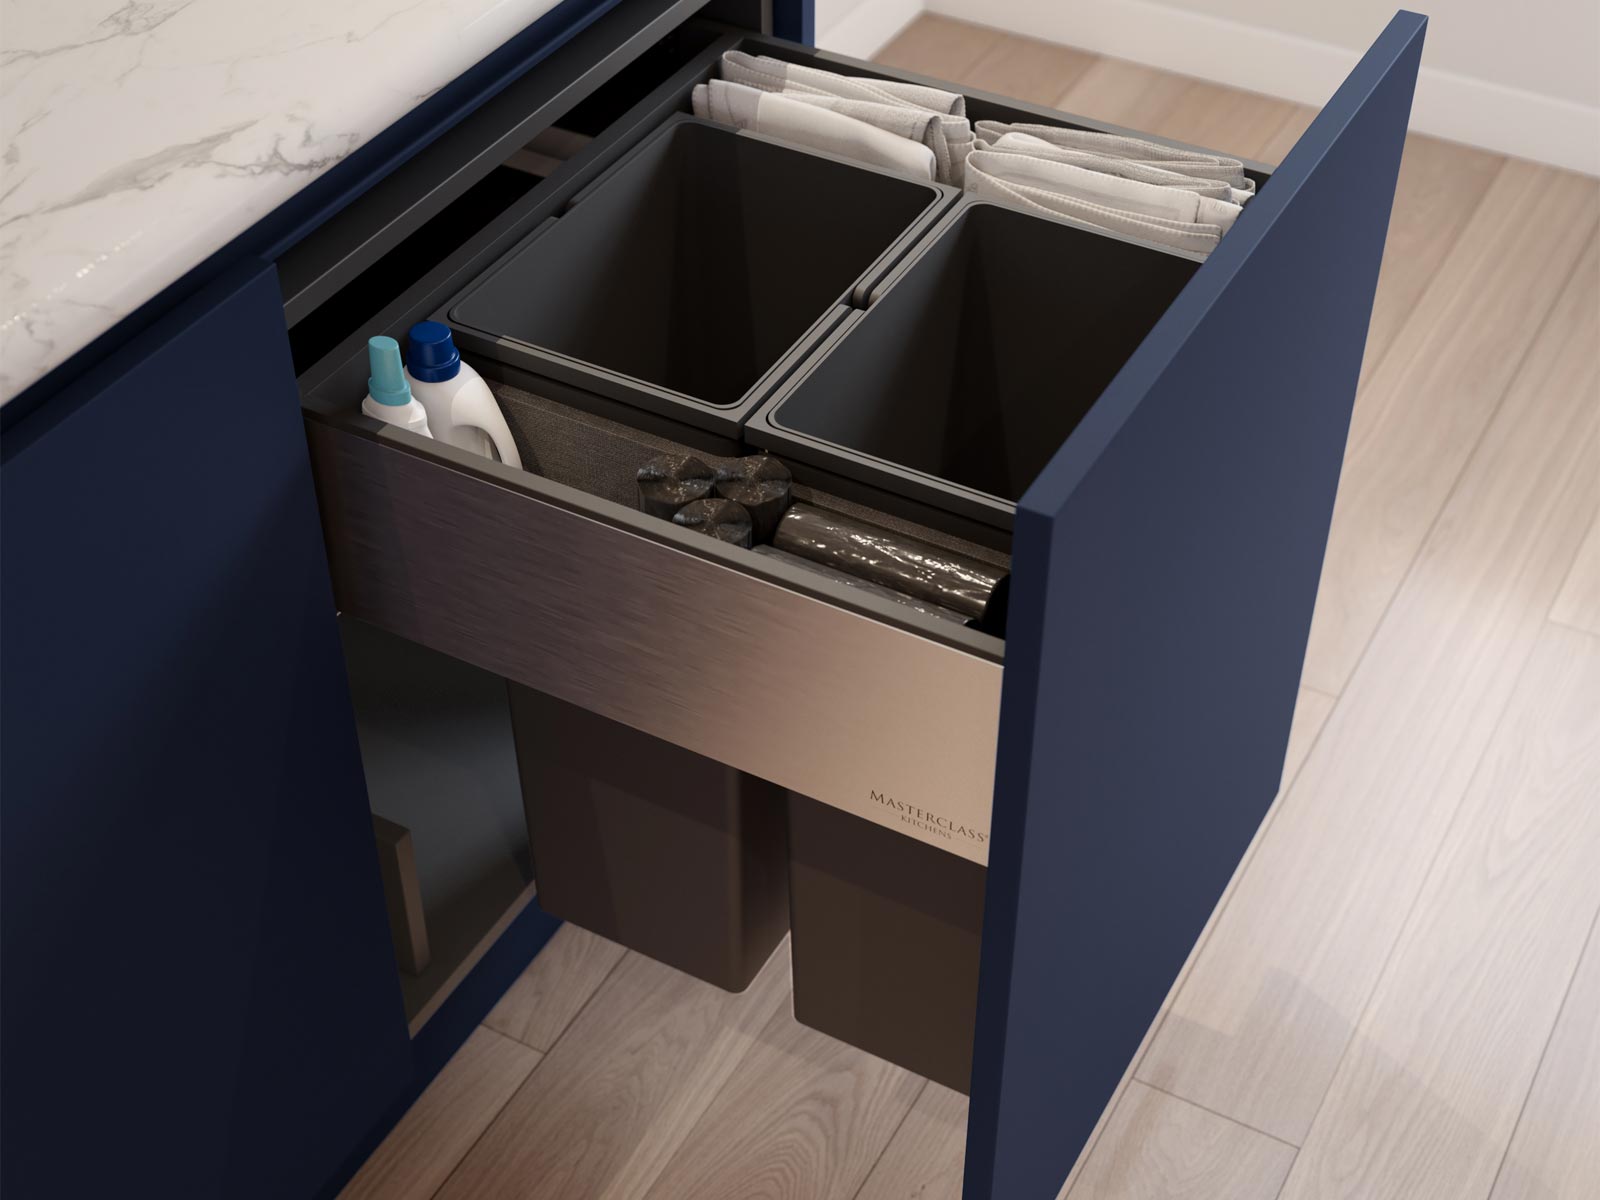 A double kitchen bin with spaces for bags and cleaning products